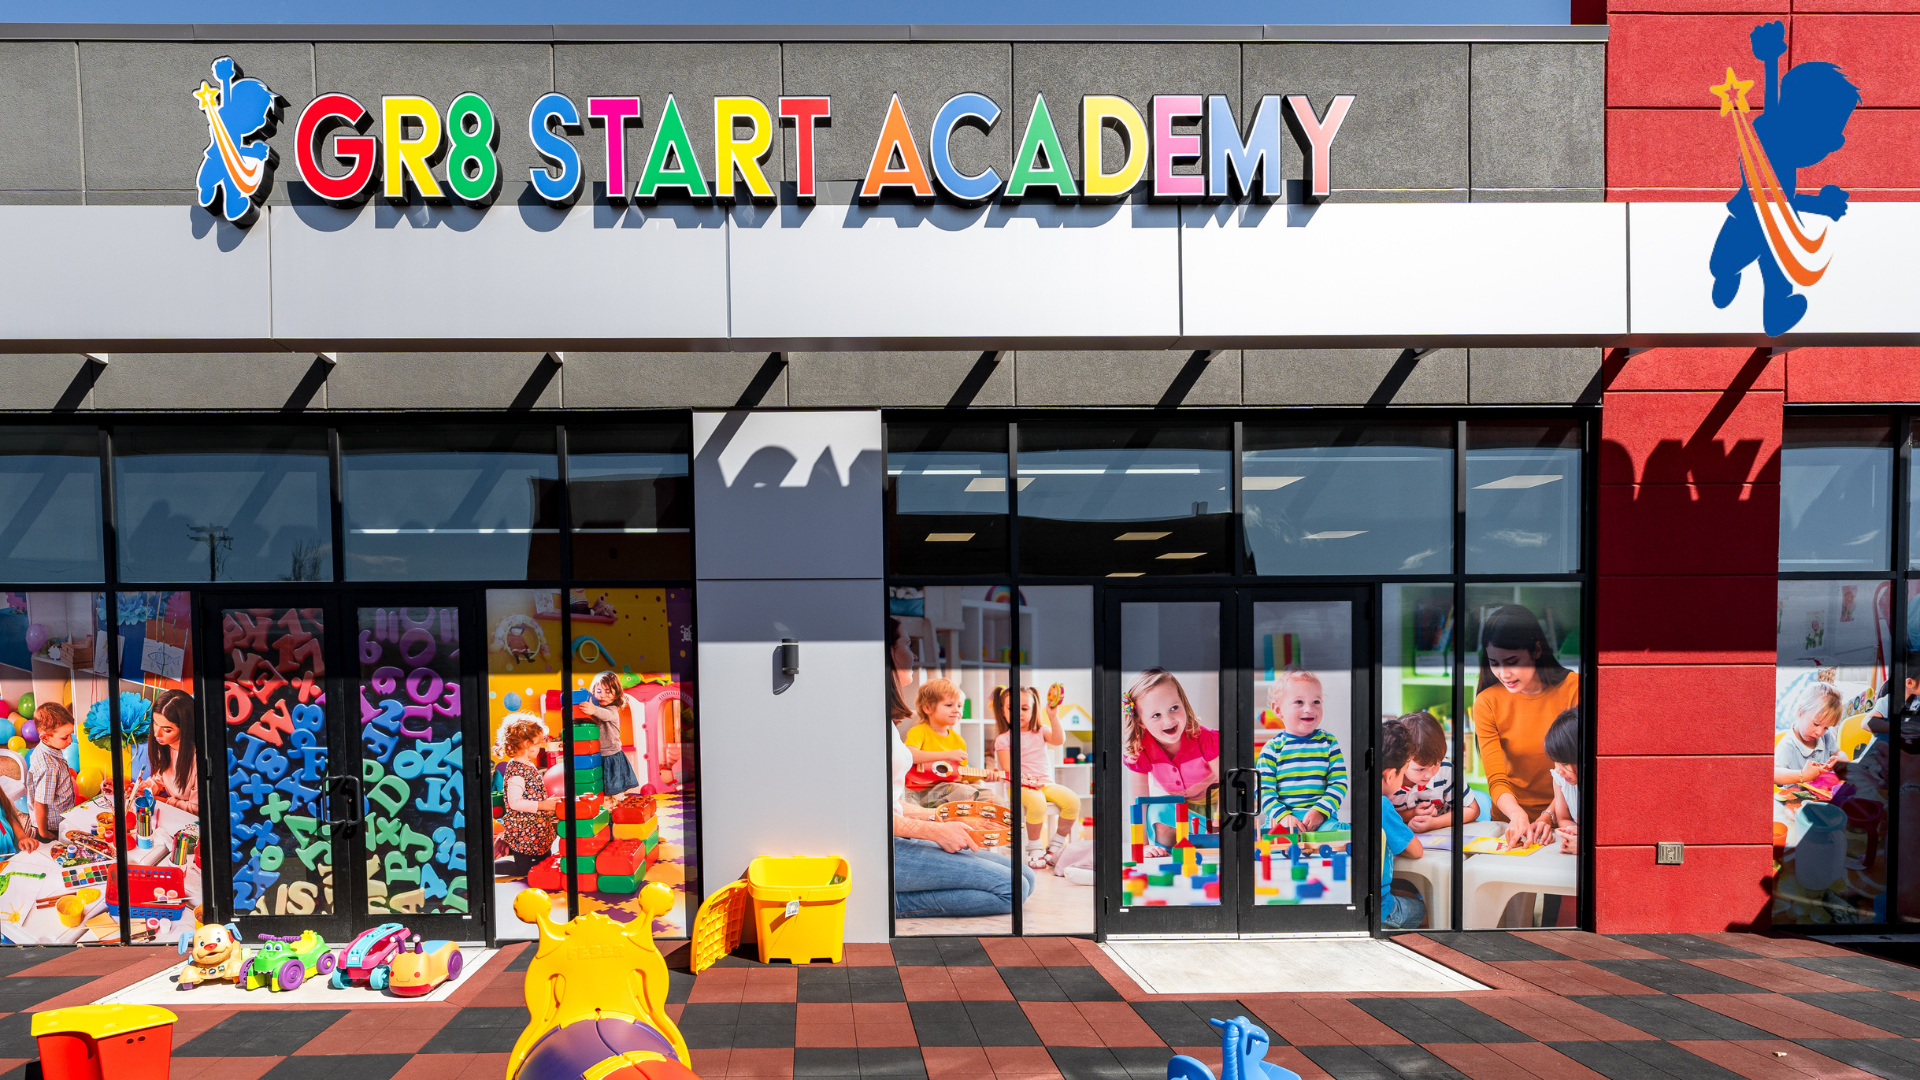 Top Daycare Services in Edmonton for Toddlers & Infants | Gr8 Start Academy